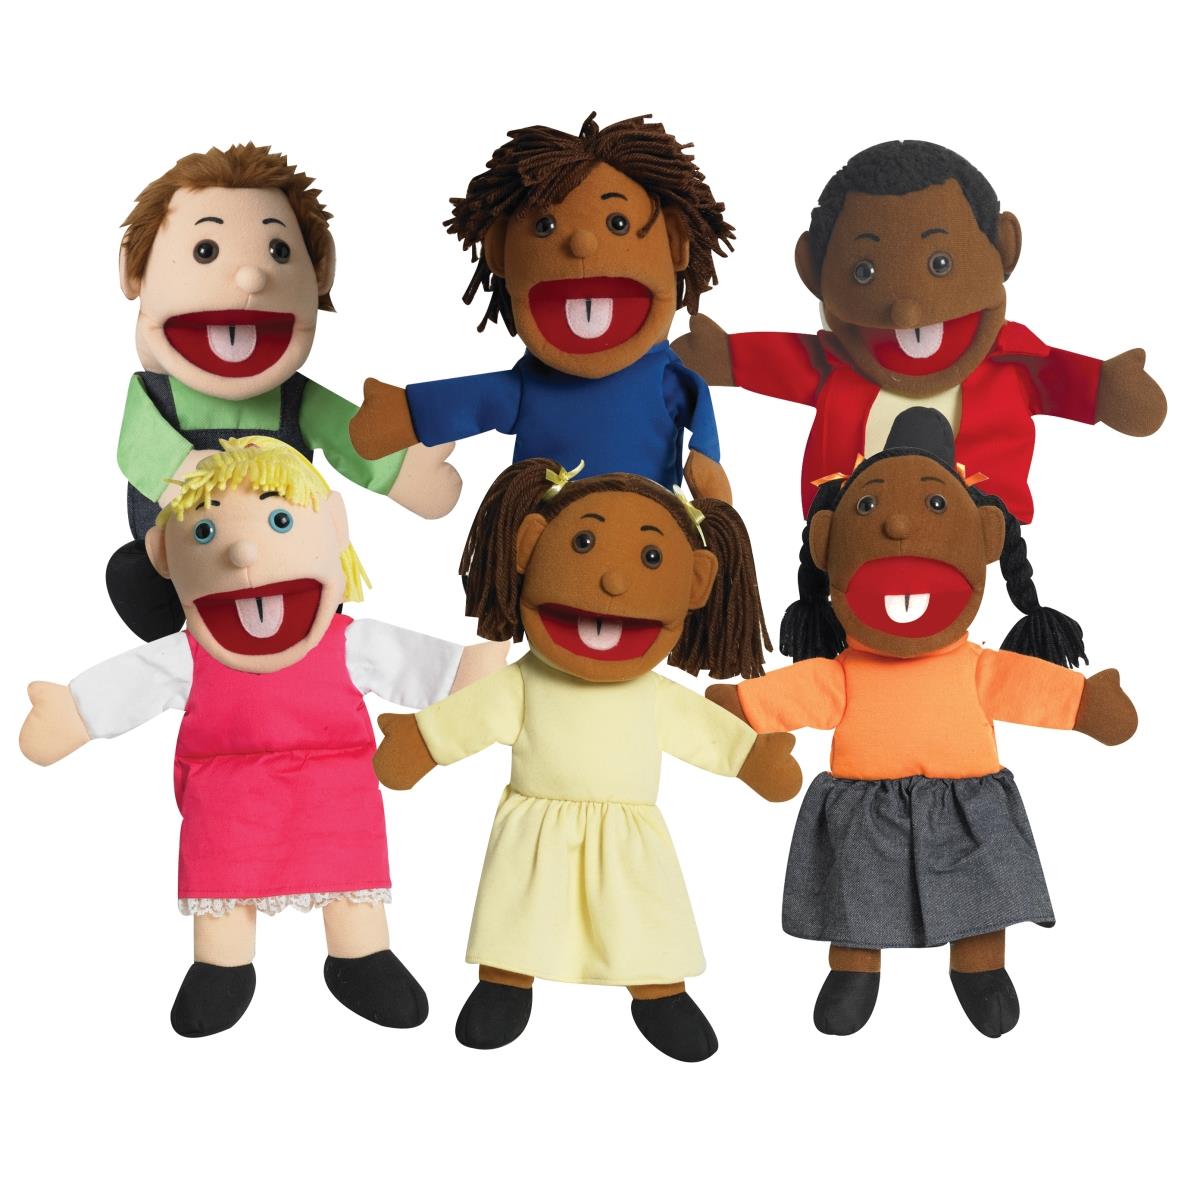 Picture of Childrens Factory CF100-896 15 in. Ethnic Children Puppets with Movable Mouths - Set of 6